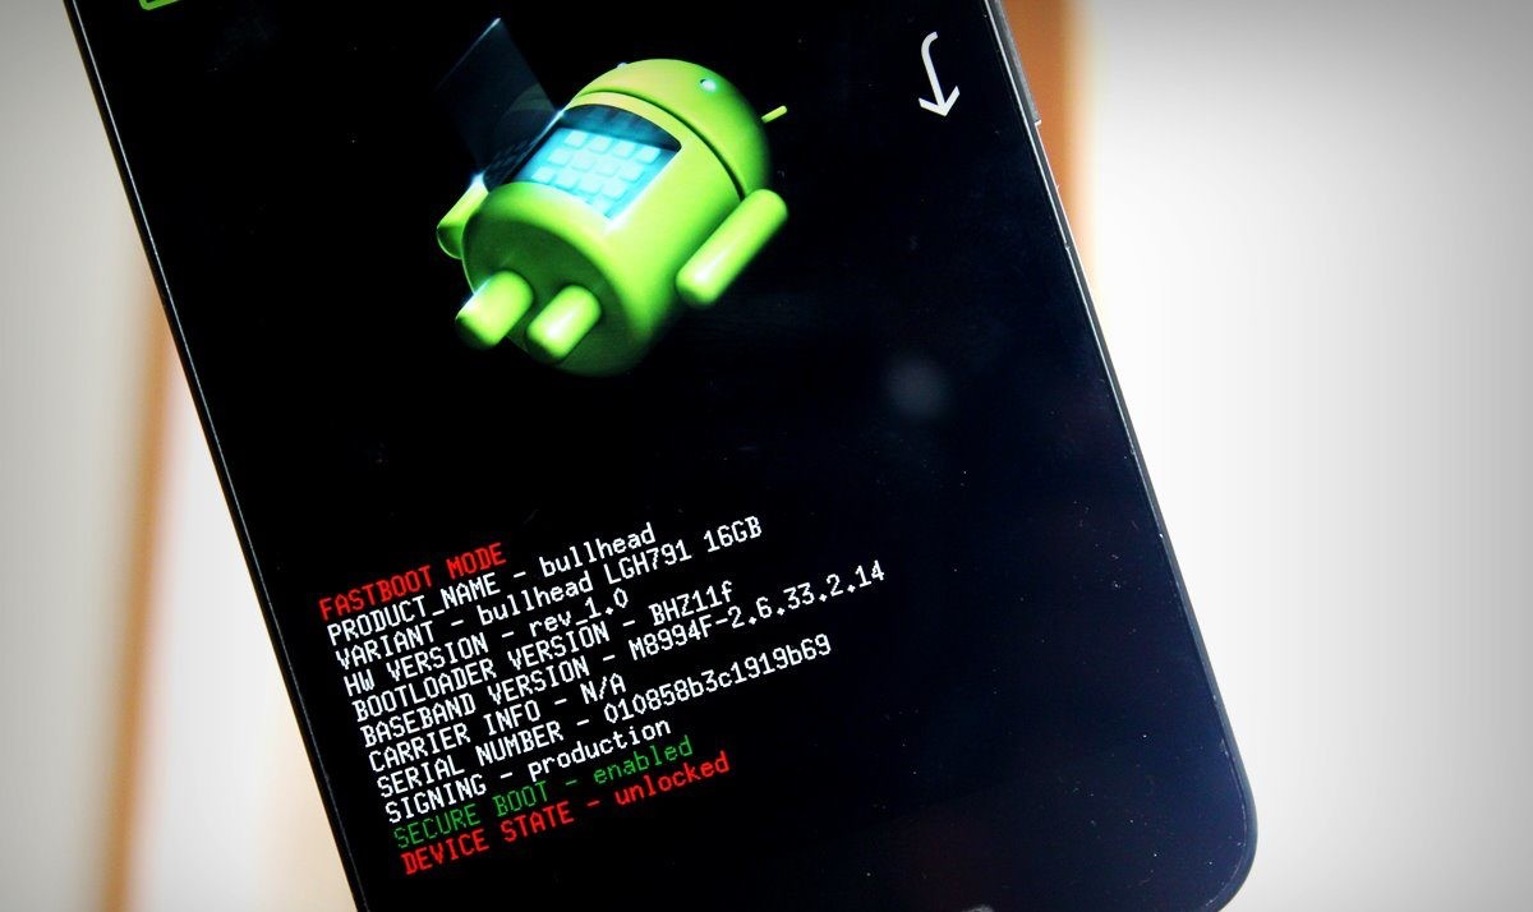 xperia-xa2-which-model-to-unlock-bootloader